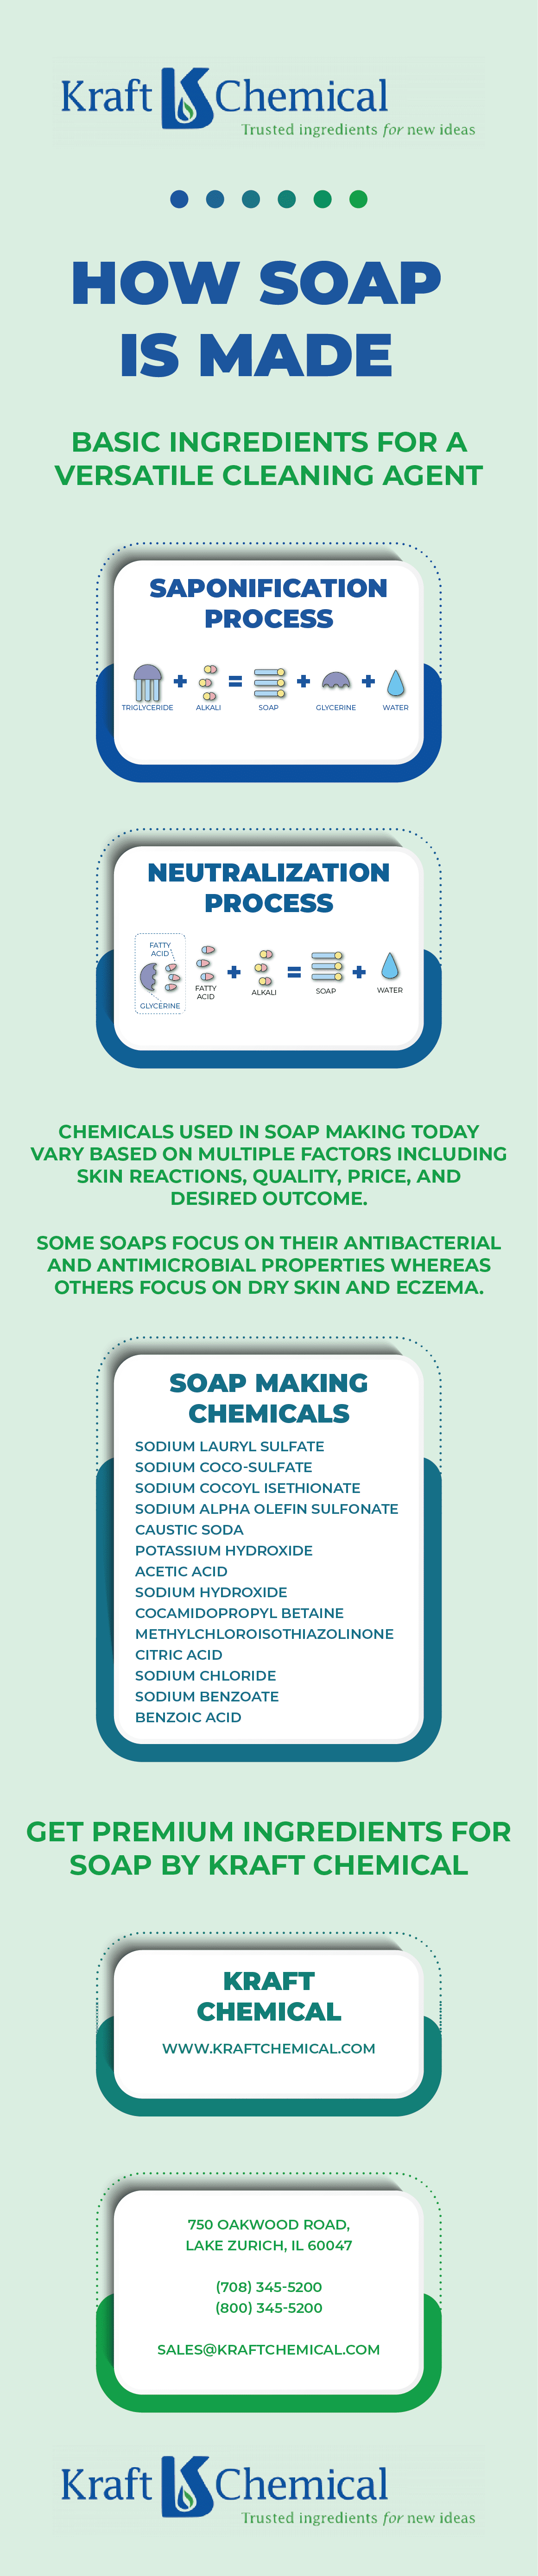 How Soap is Made